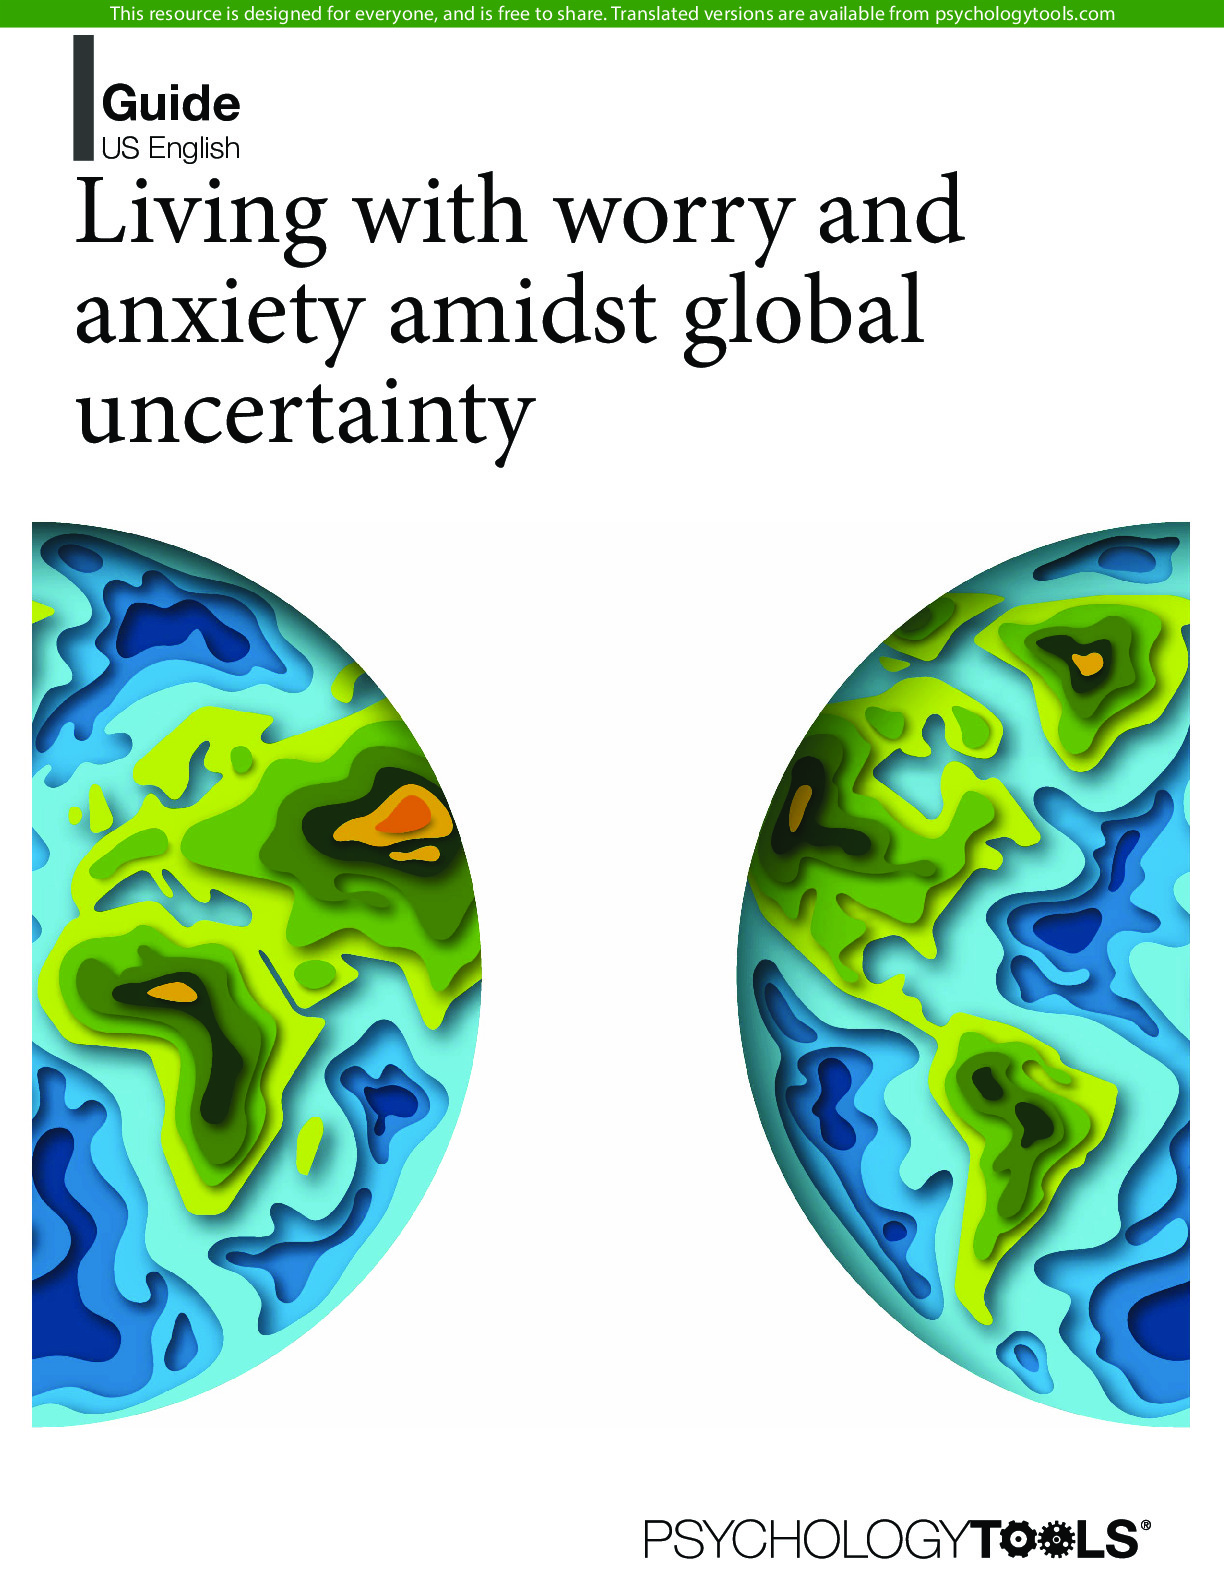 Guide to living with worry and anxiety amidst global uncertainty